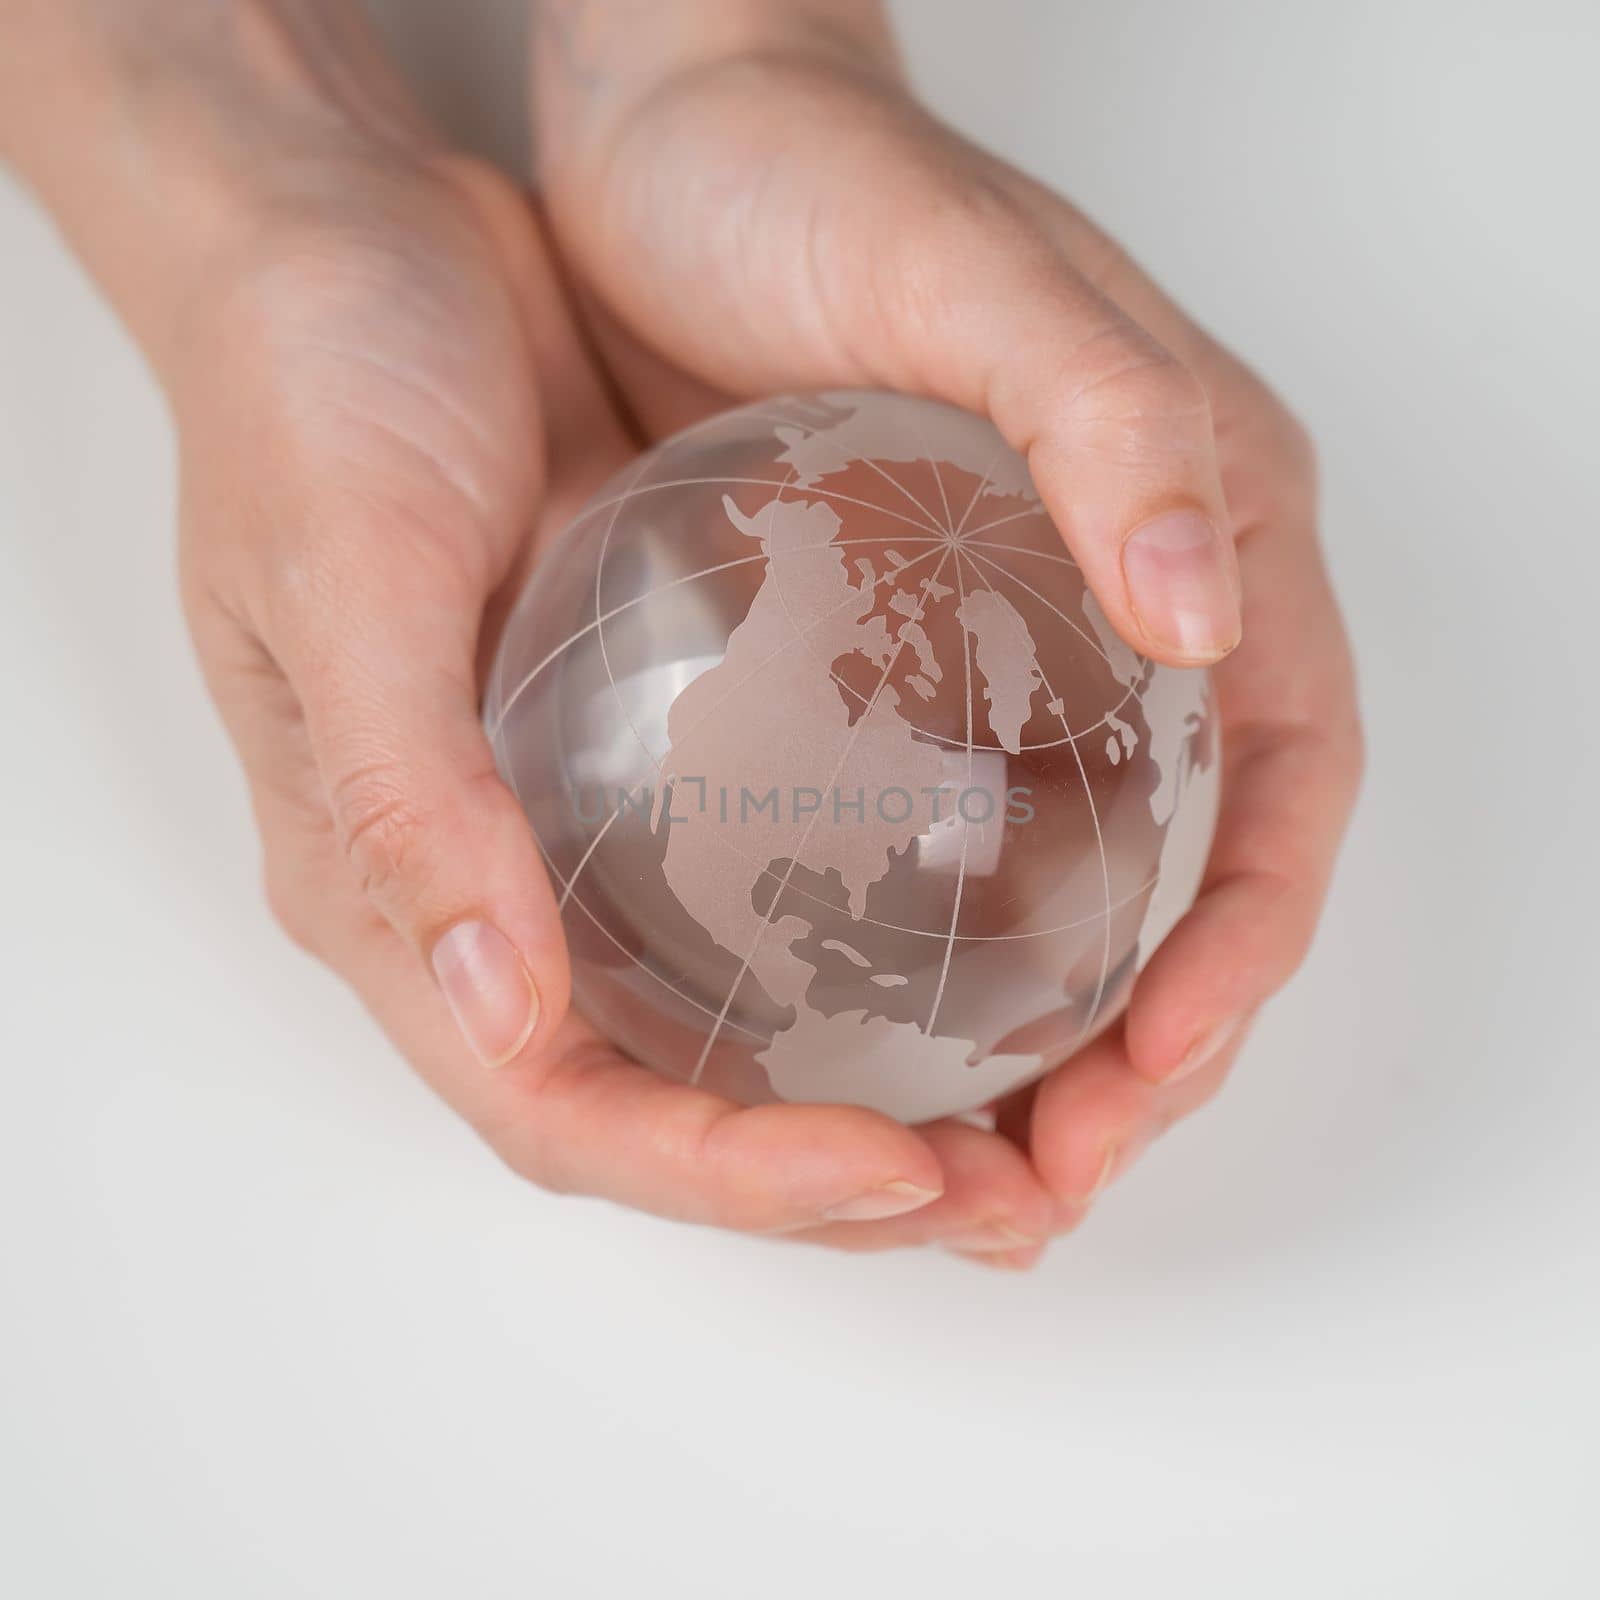 Crystal globe in female hands on a white background. by mrwed54